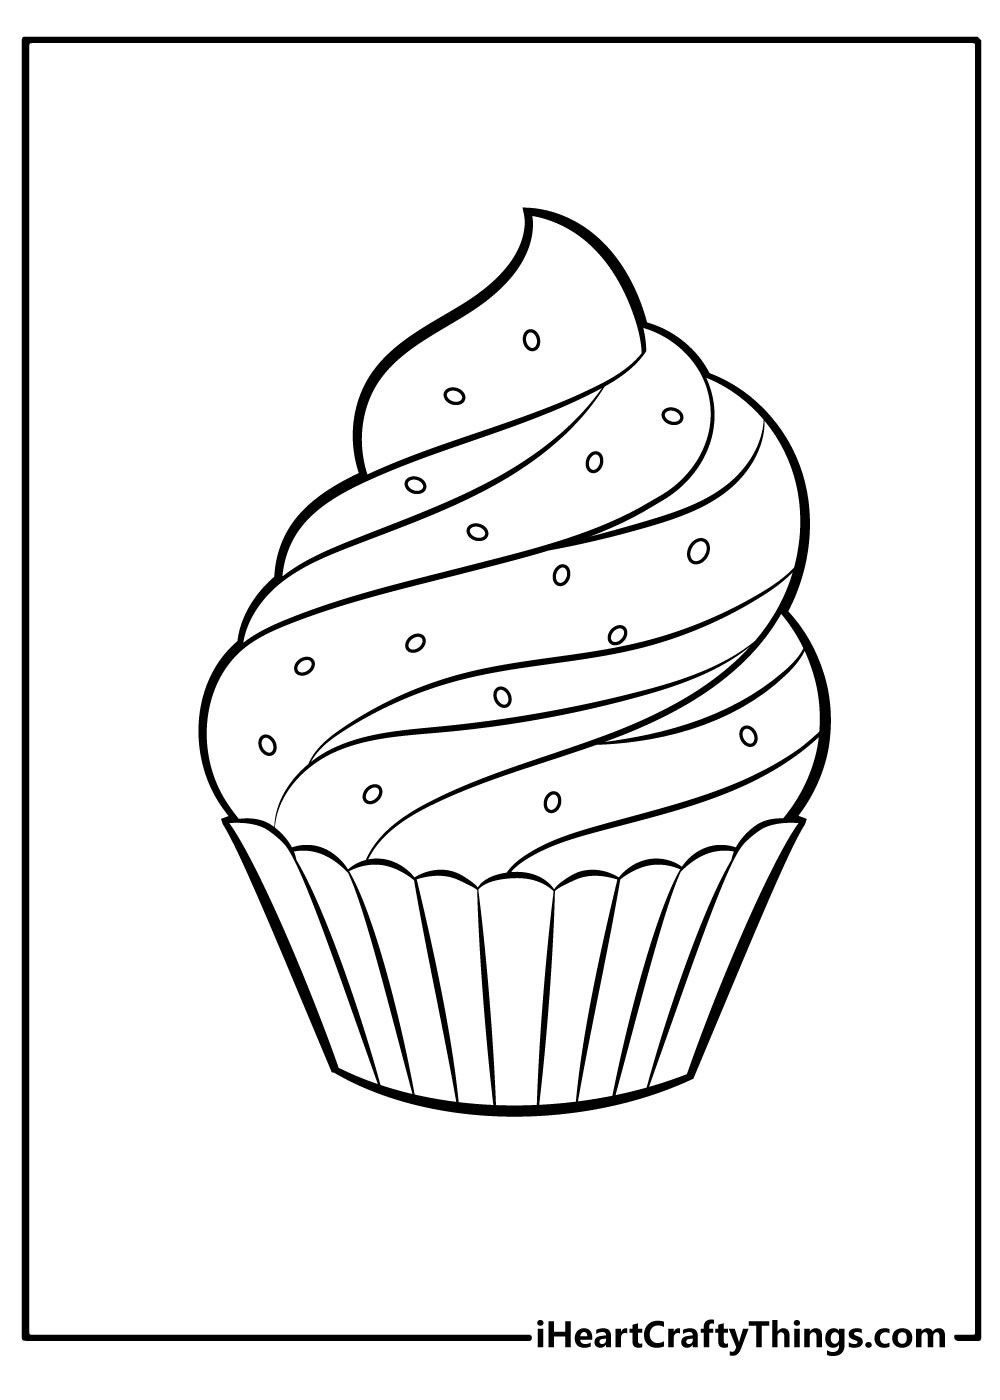 birthday Cupcake Coloring Pages free download